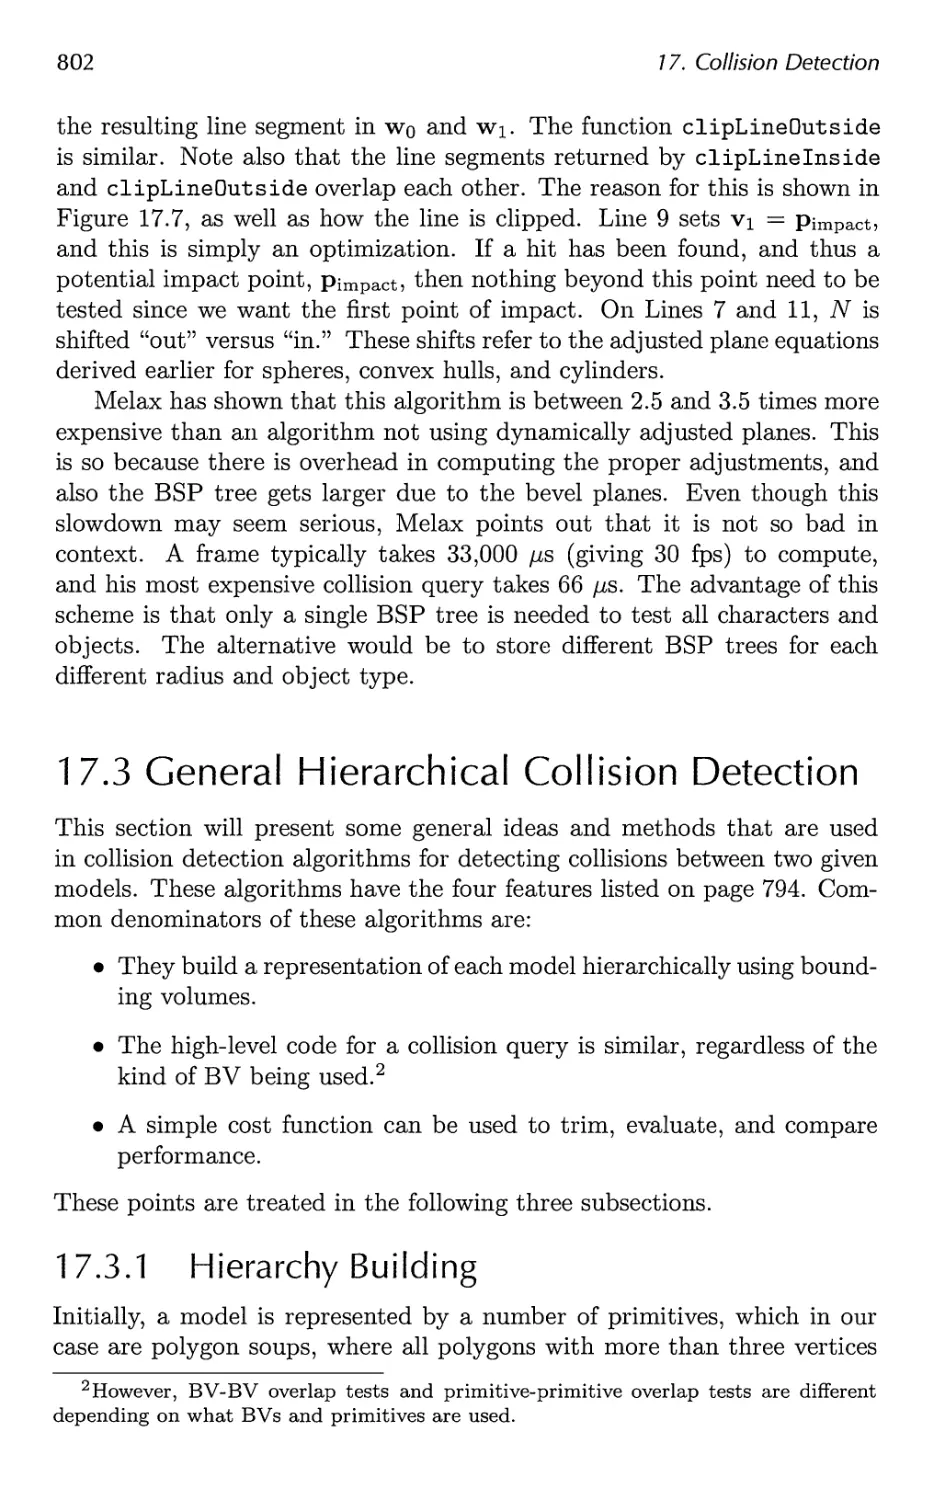 17.3 General Hierarchical Collision Detection